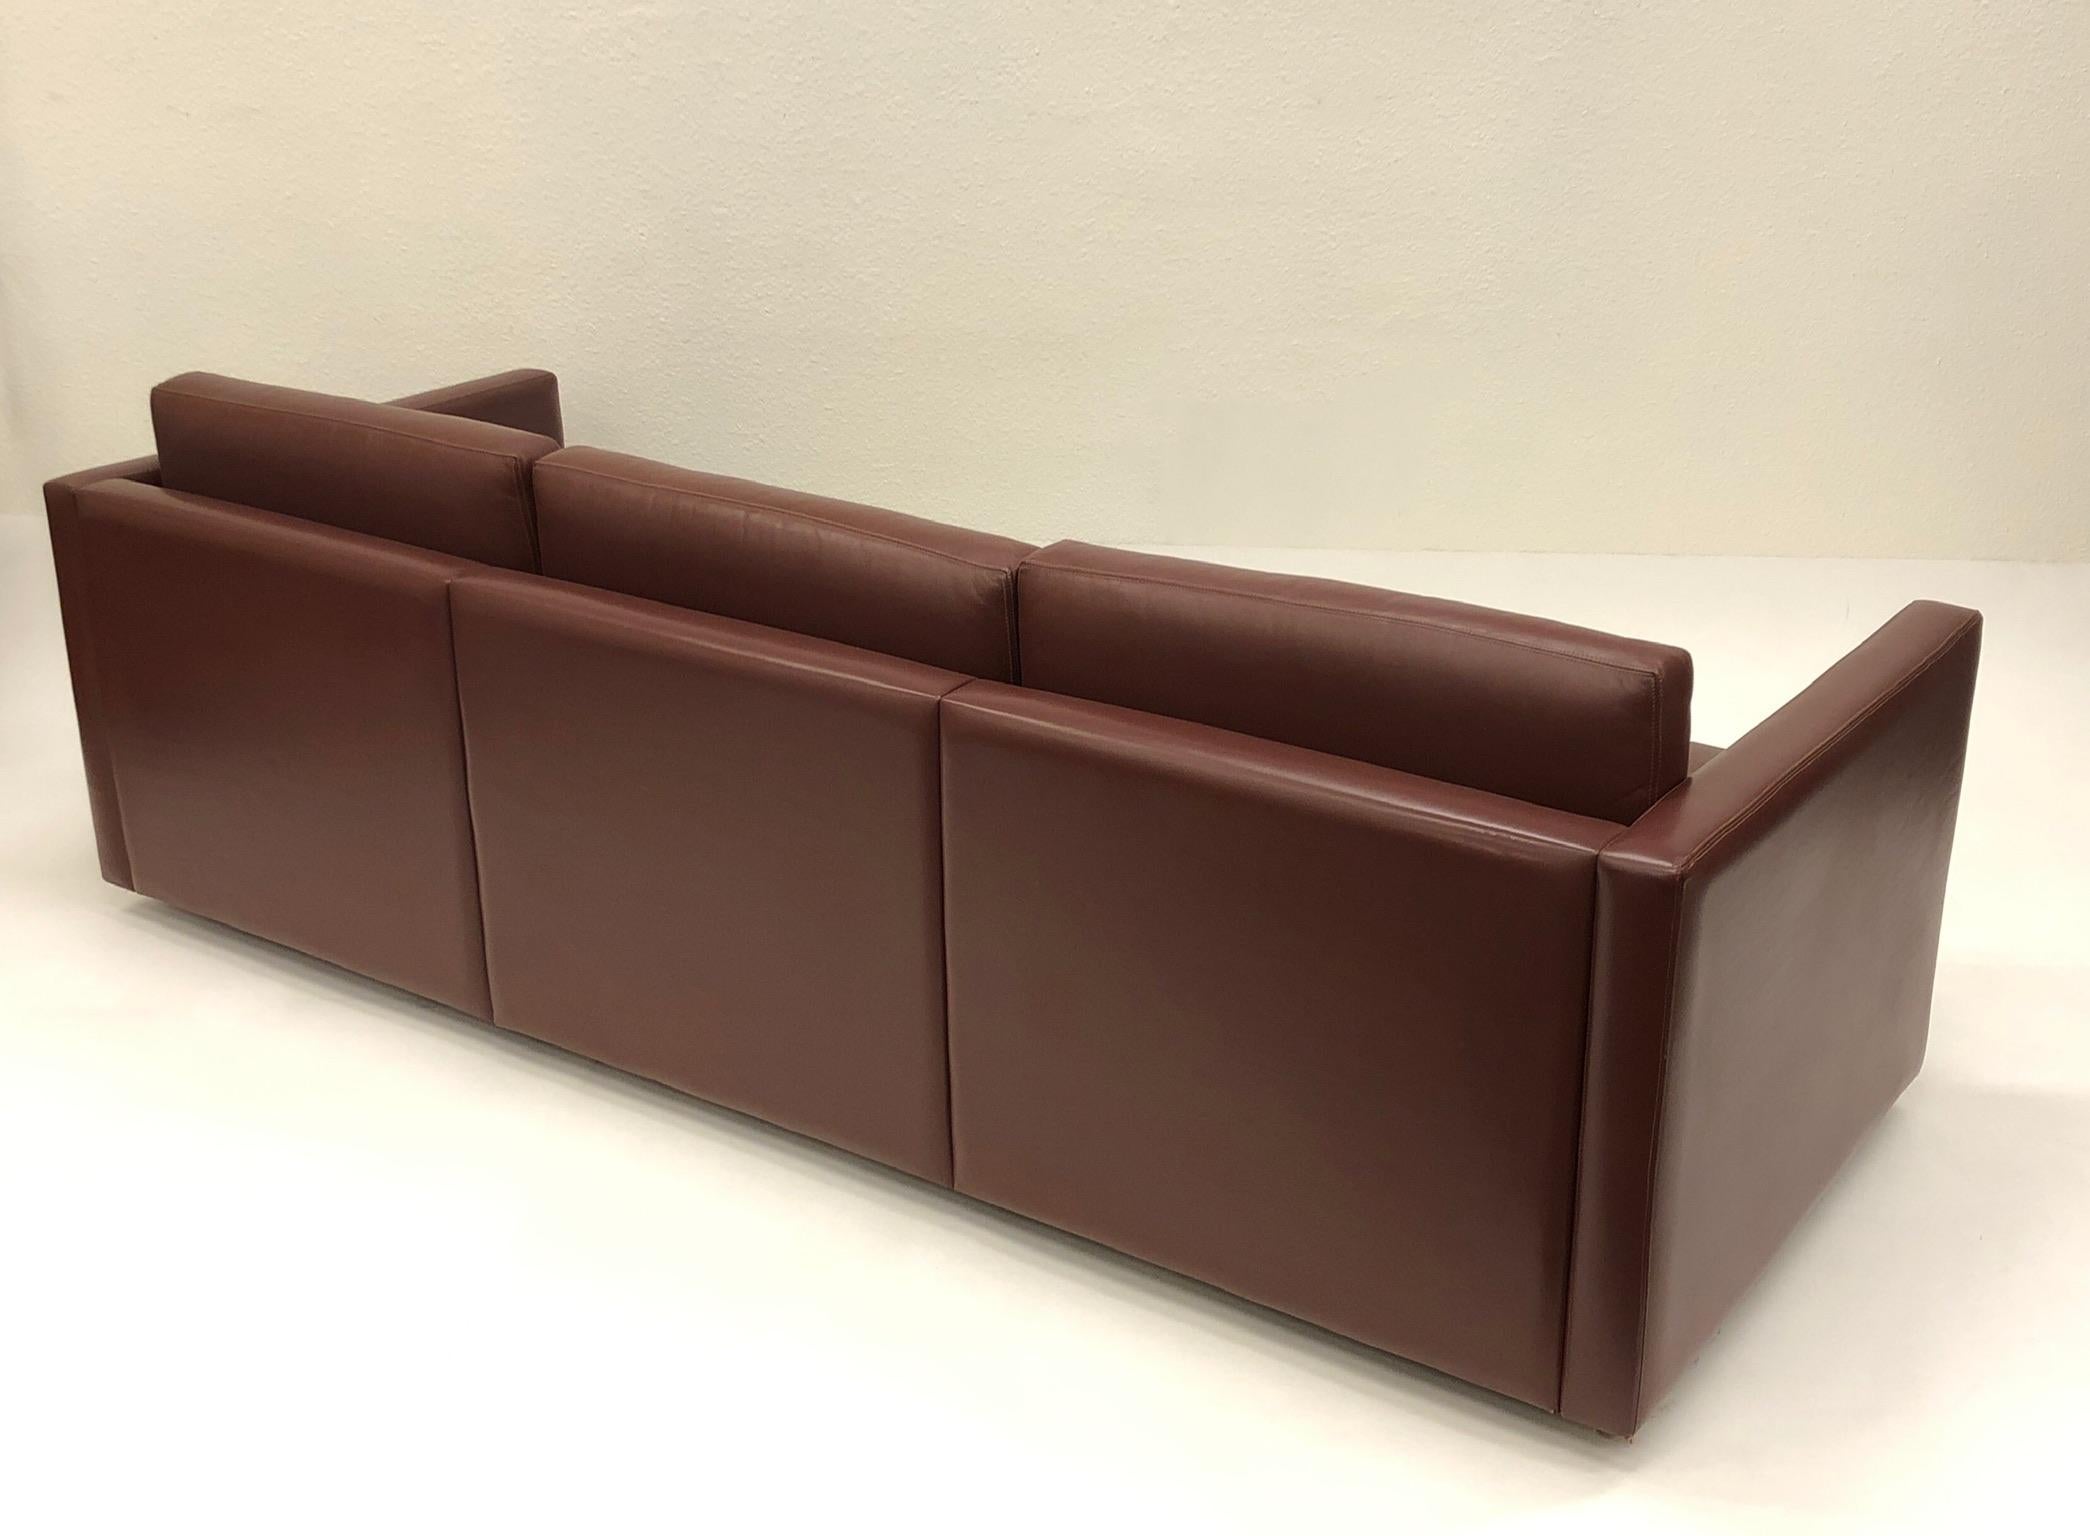 American Burgundy Leather Sofa by Charles Pfister for Knoll